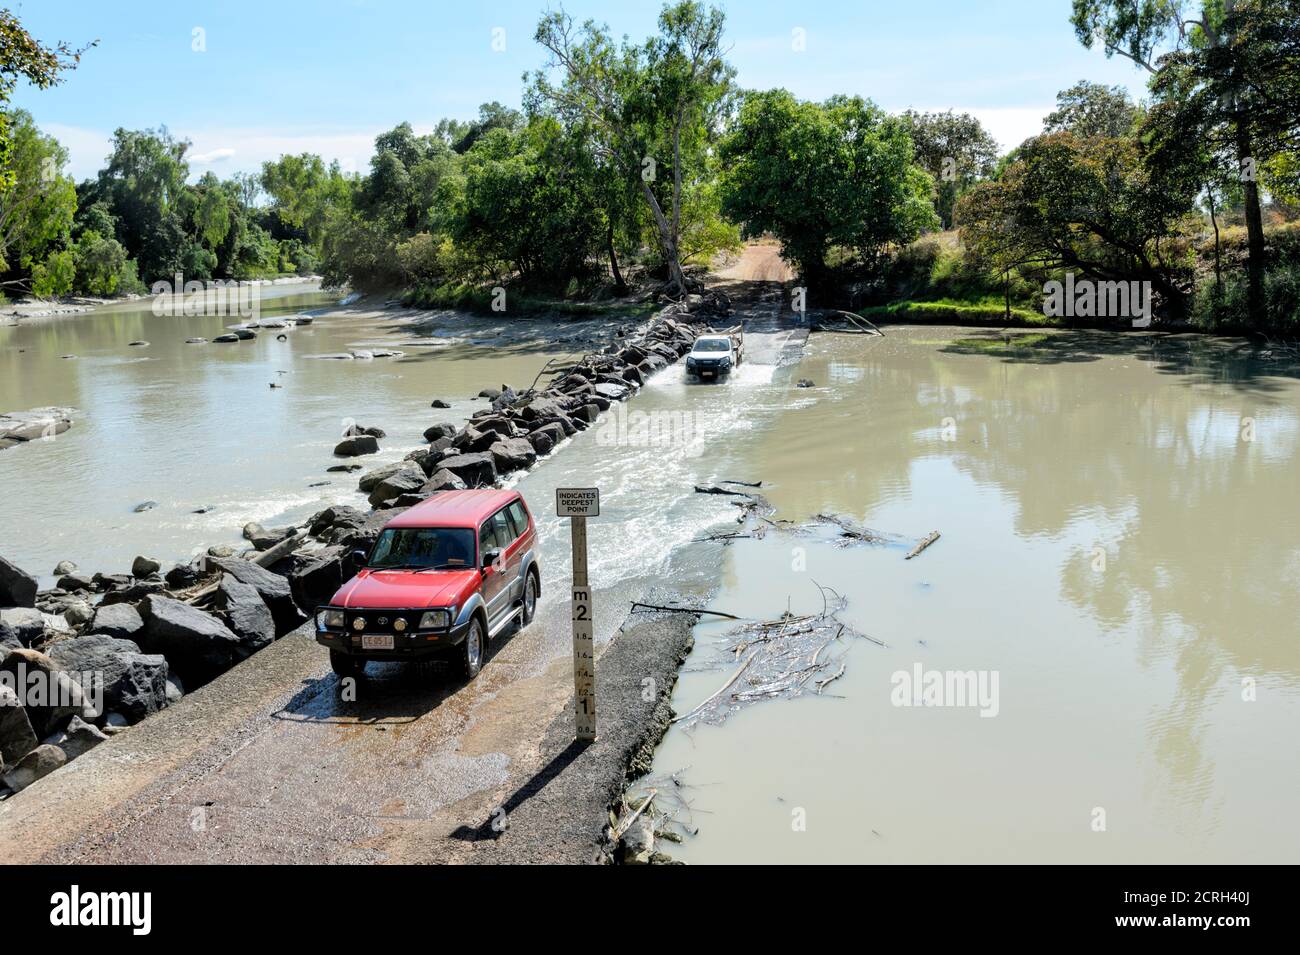 Vehicles driving through the dangerous tidal crossing of the East Alligator River at famous Cahill's Crossing, Kakadu National Park, Northern Territor Stock Photo